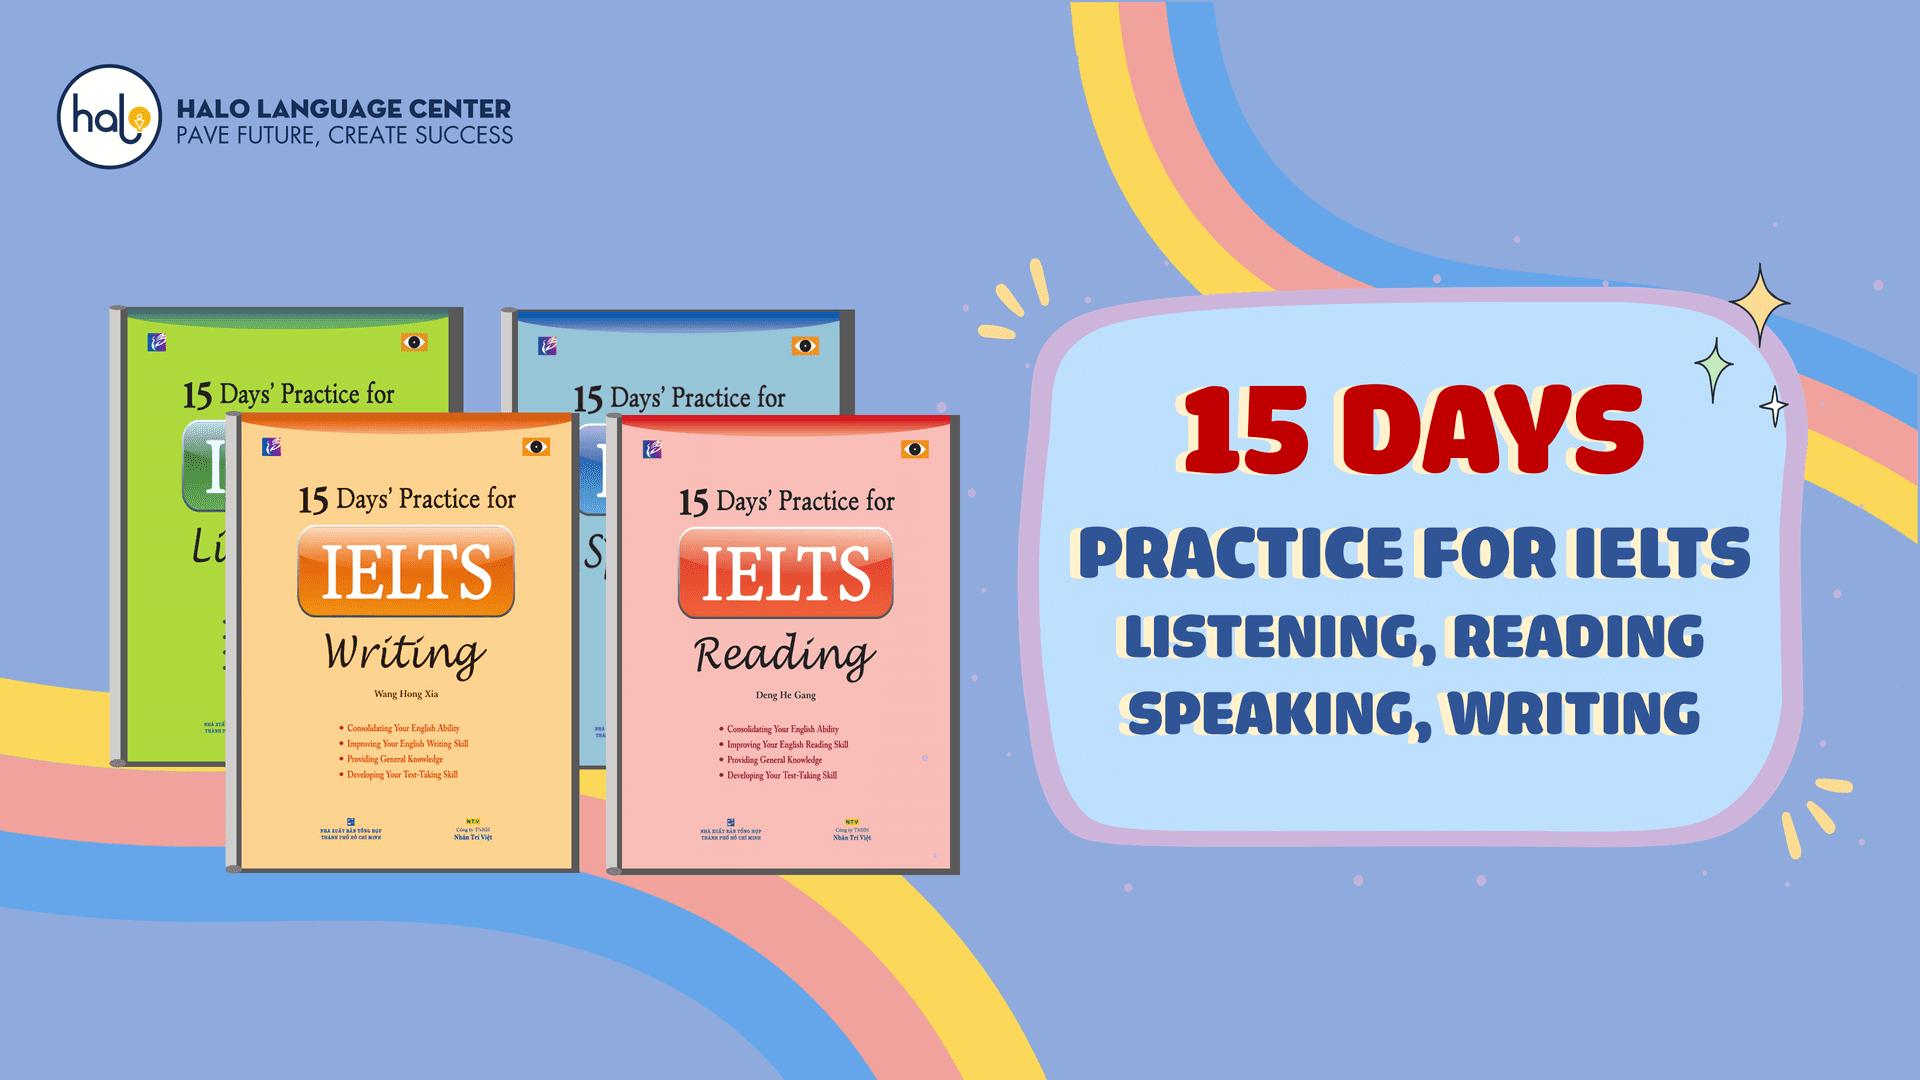 15 Days Practice For IELTS Listening, Reading Speaking Writing